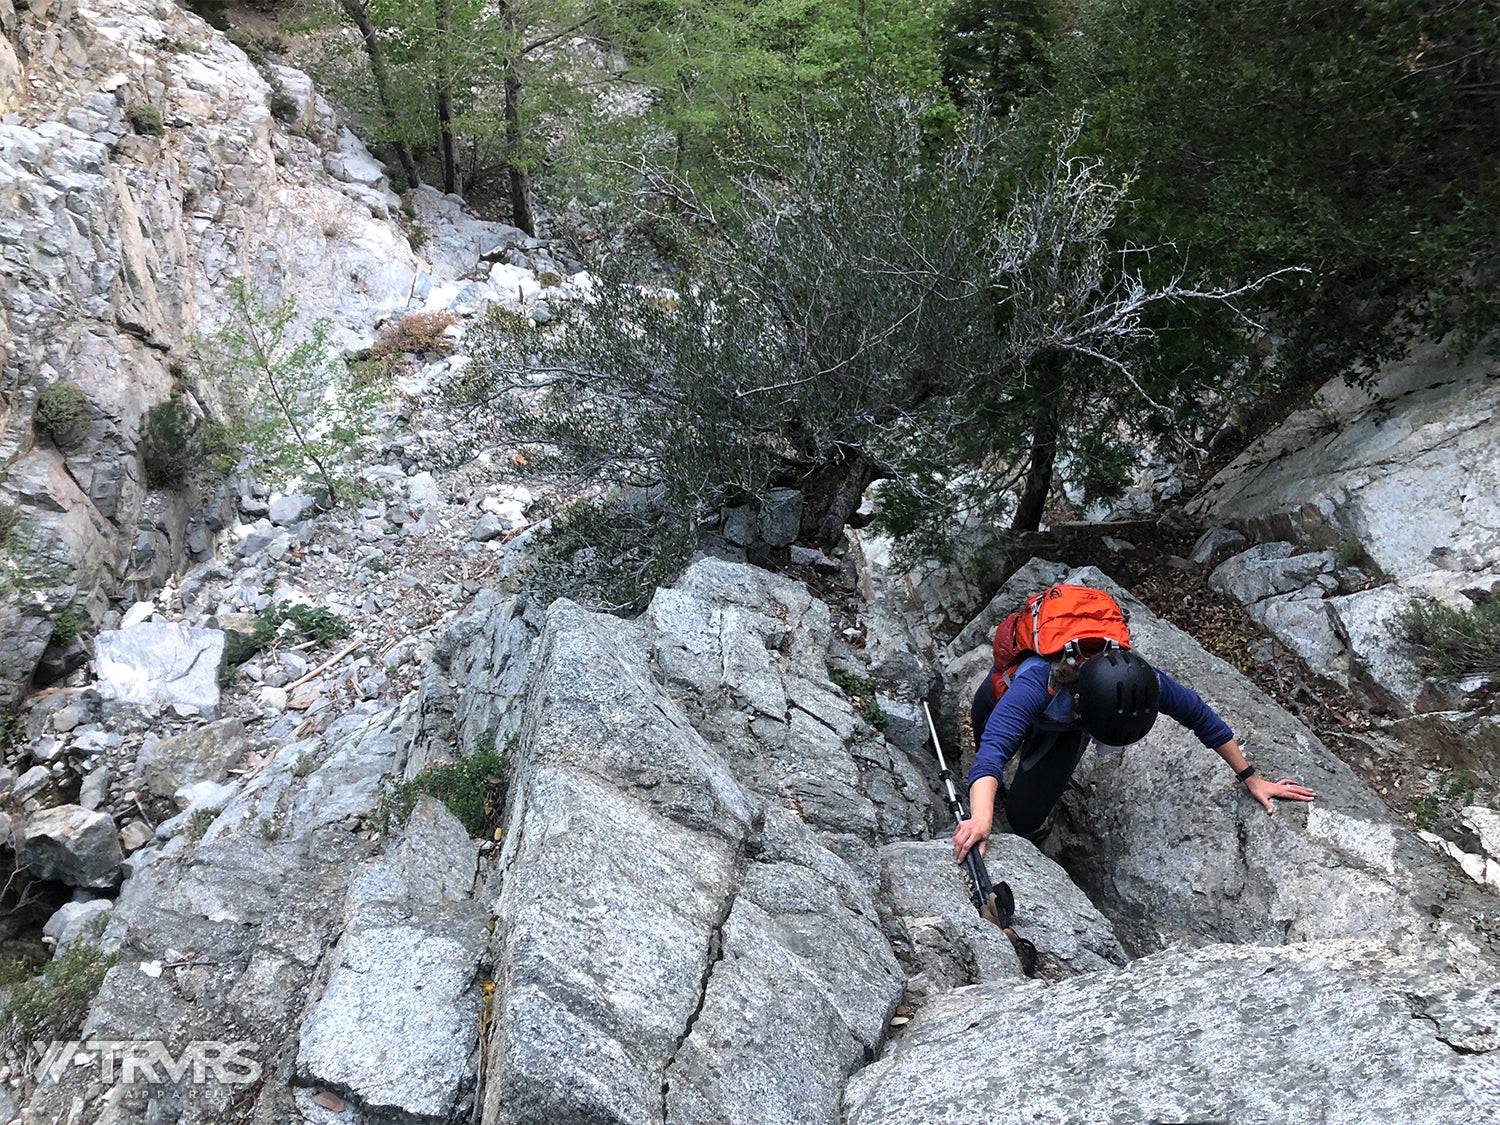 ascending-the-falls--icehouse-canyon-Ontario Peak via Falling Rock Canyon - Angeles National Forest - San Gabriel Mountain Range - TRVRS APPAREL - Clothing Brand